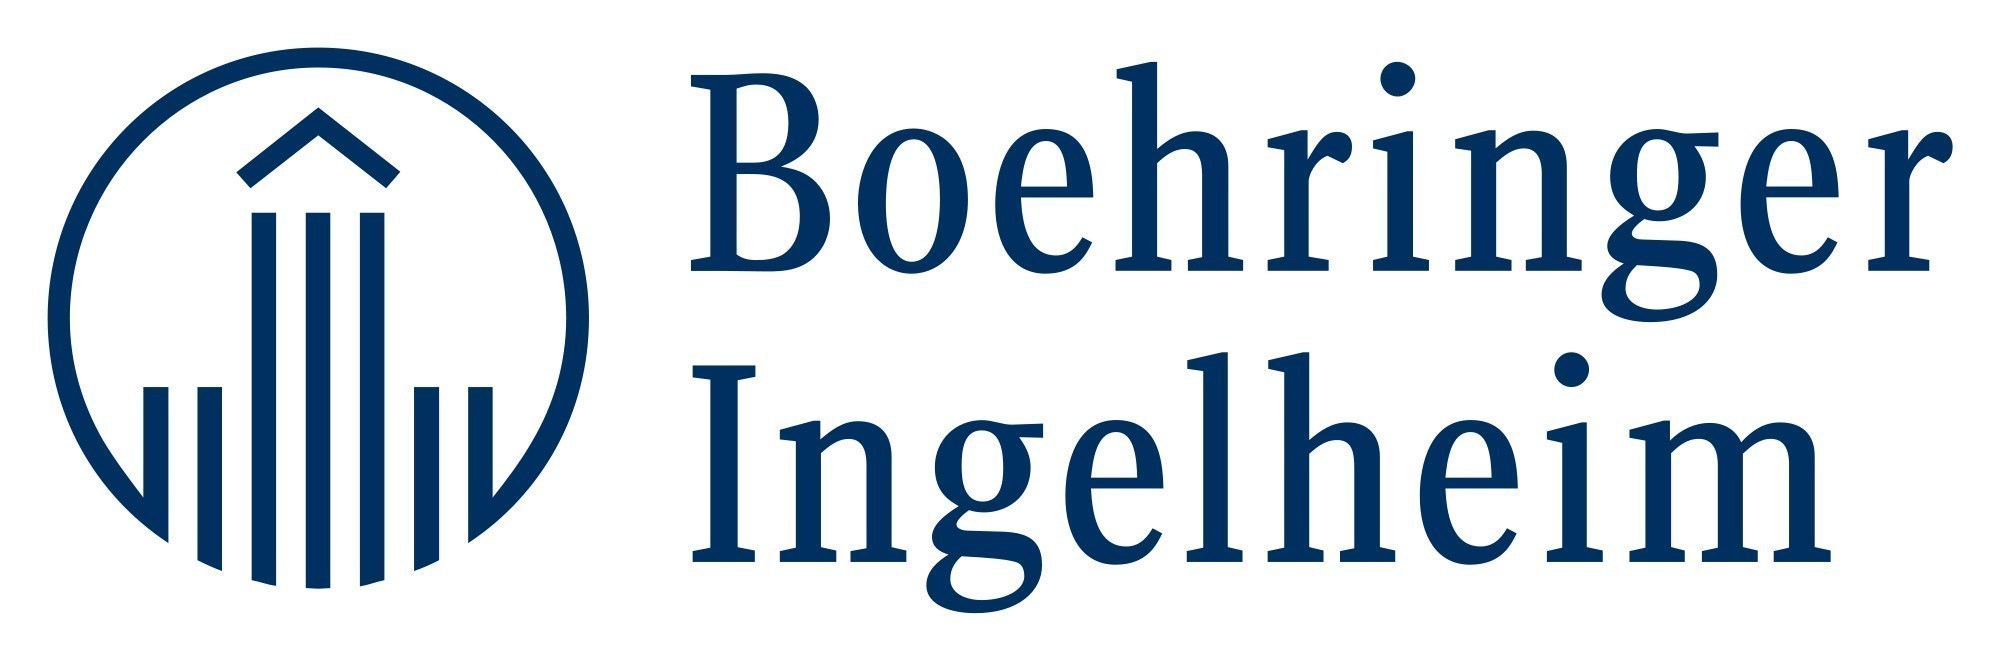 BOEHRINGER INGELHEIM DONATES NEARLY 100,000 PET VACCINE DOSES TO HELP ELIMINATE RABIES AROUND THE WORLD WITH RELAUNCH OF SHOTS FOR GOOD(SM) INITIATIVE